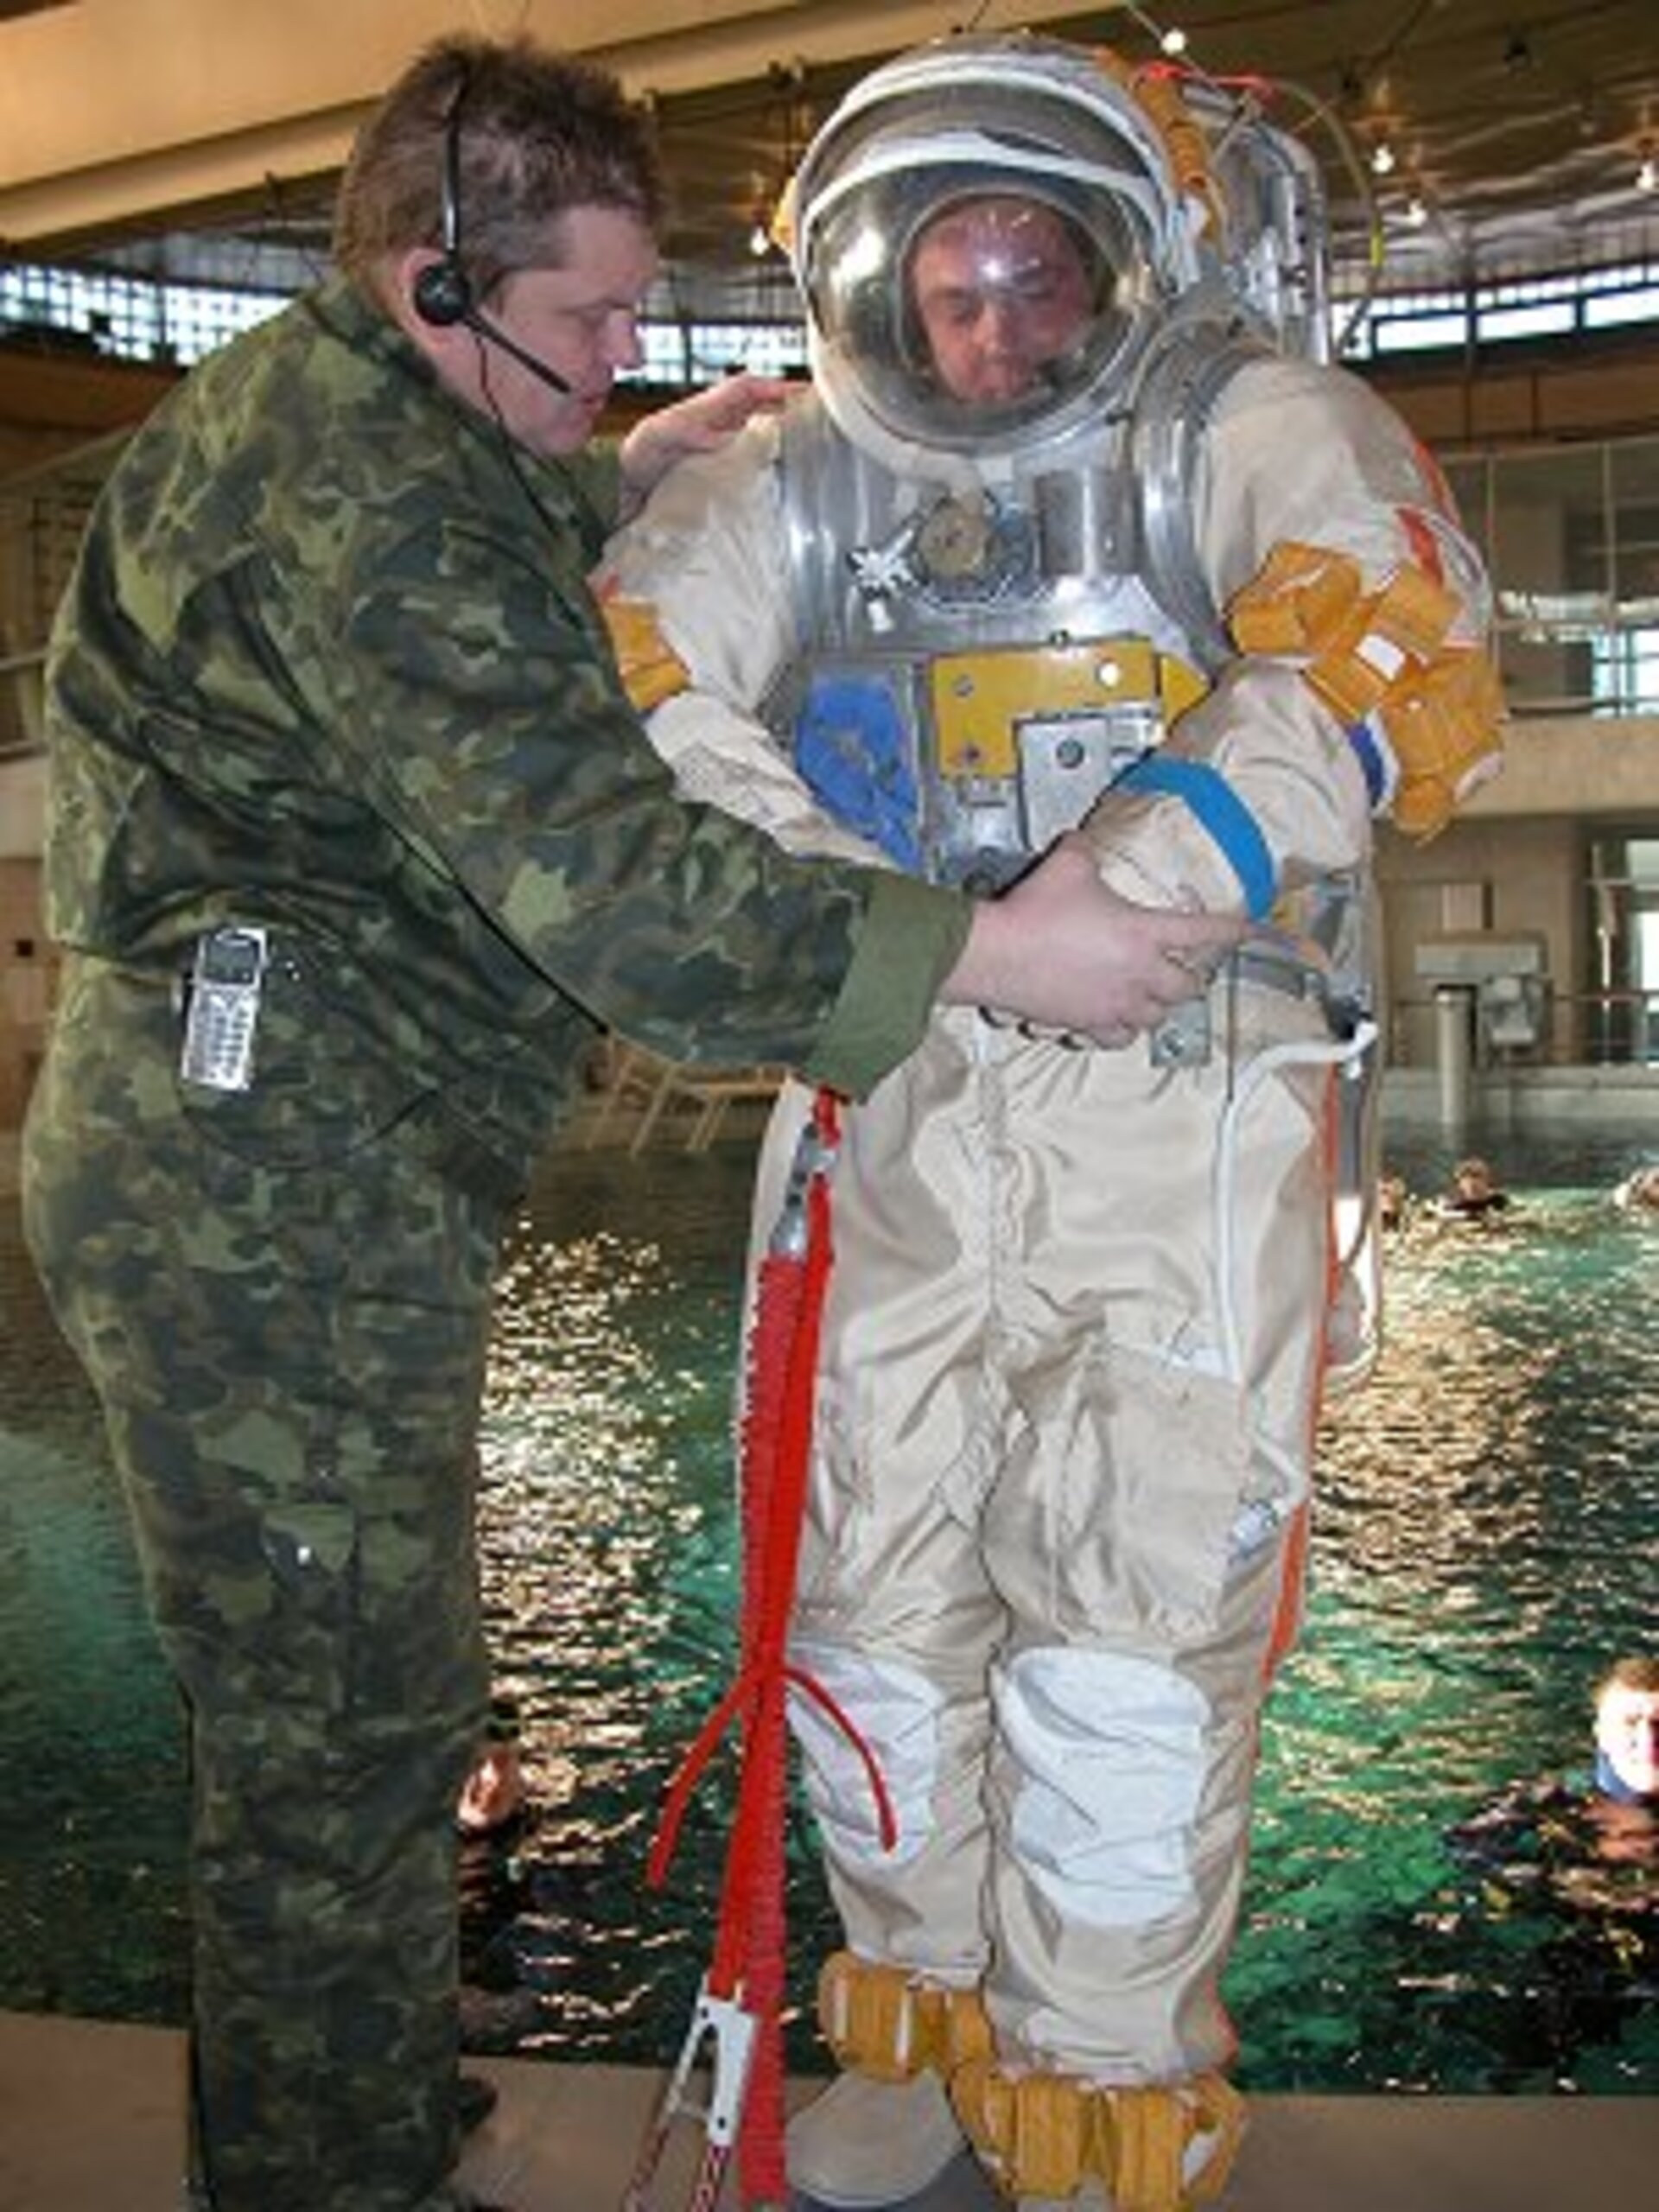 ESA astronaut André Kuipers performed the tests in a Russian Orlan spacesuit